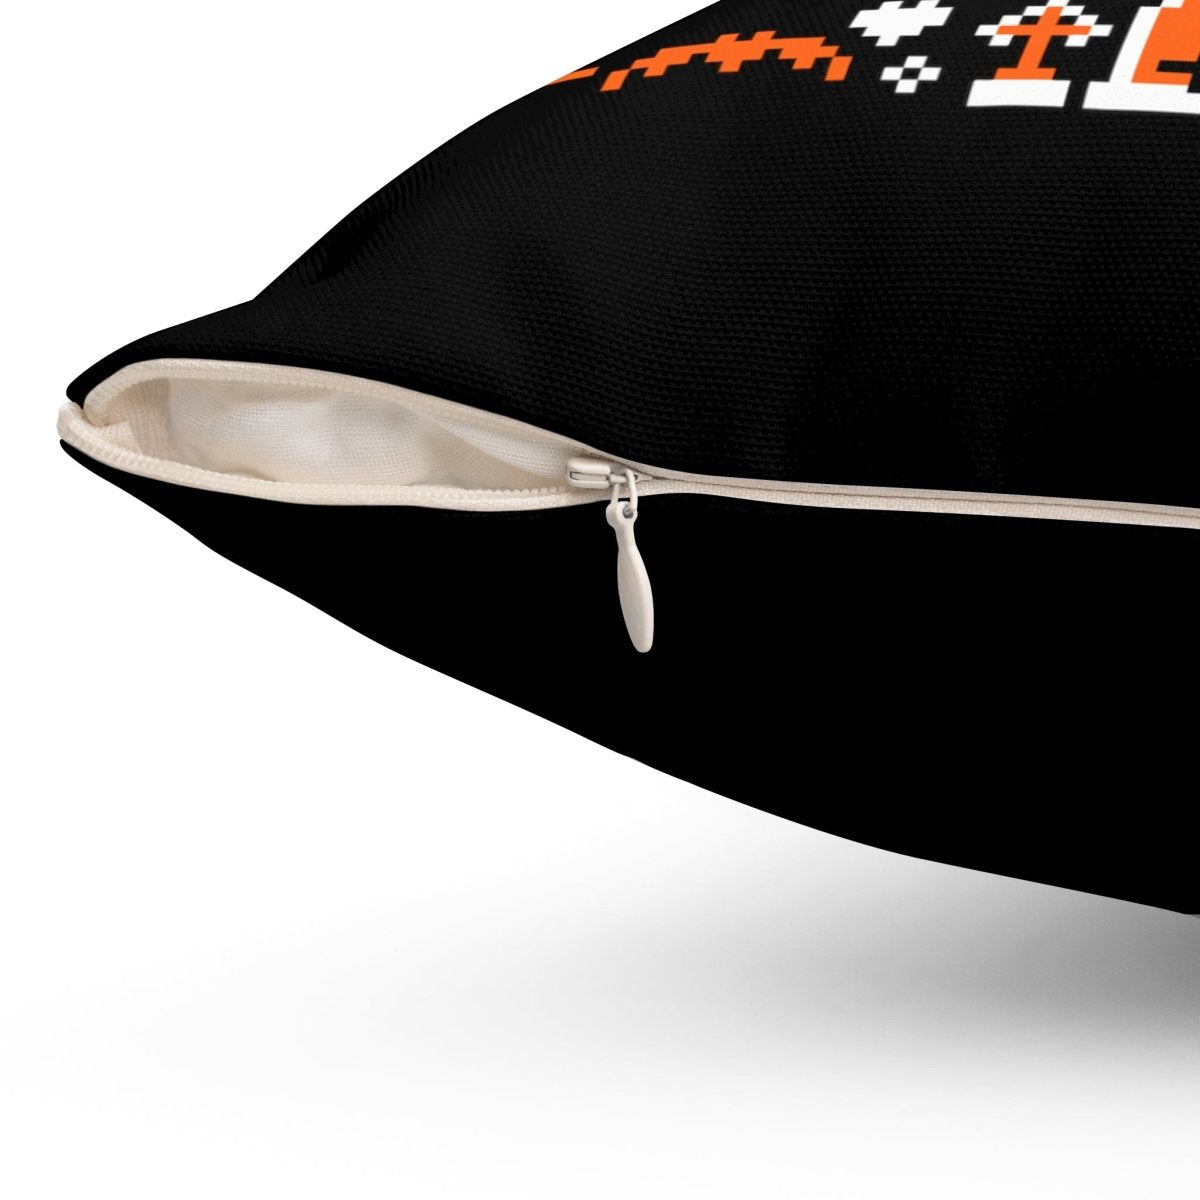 Too Fast | Every Night is Halloween Throw Pillow